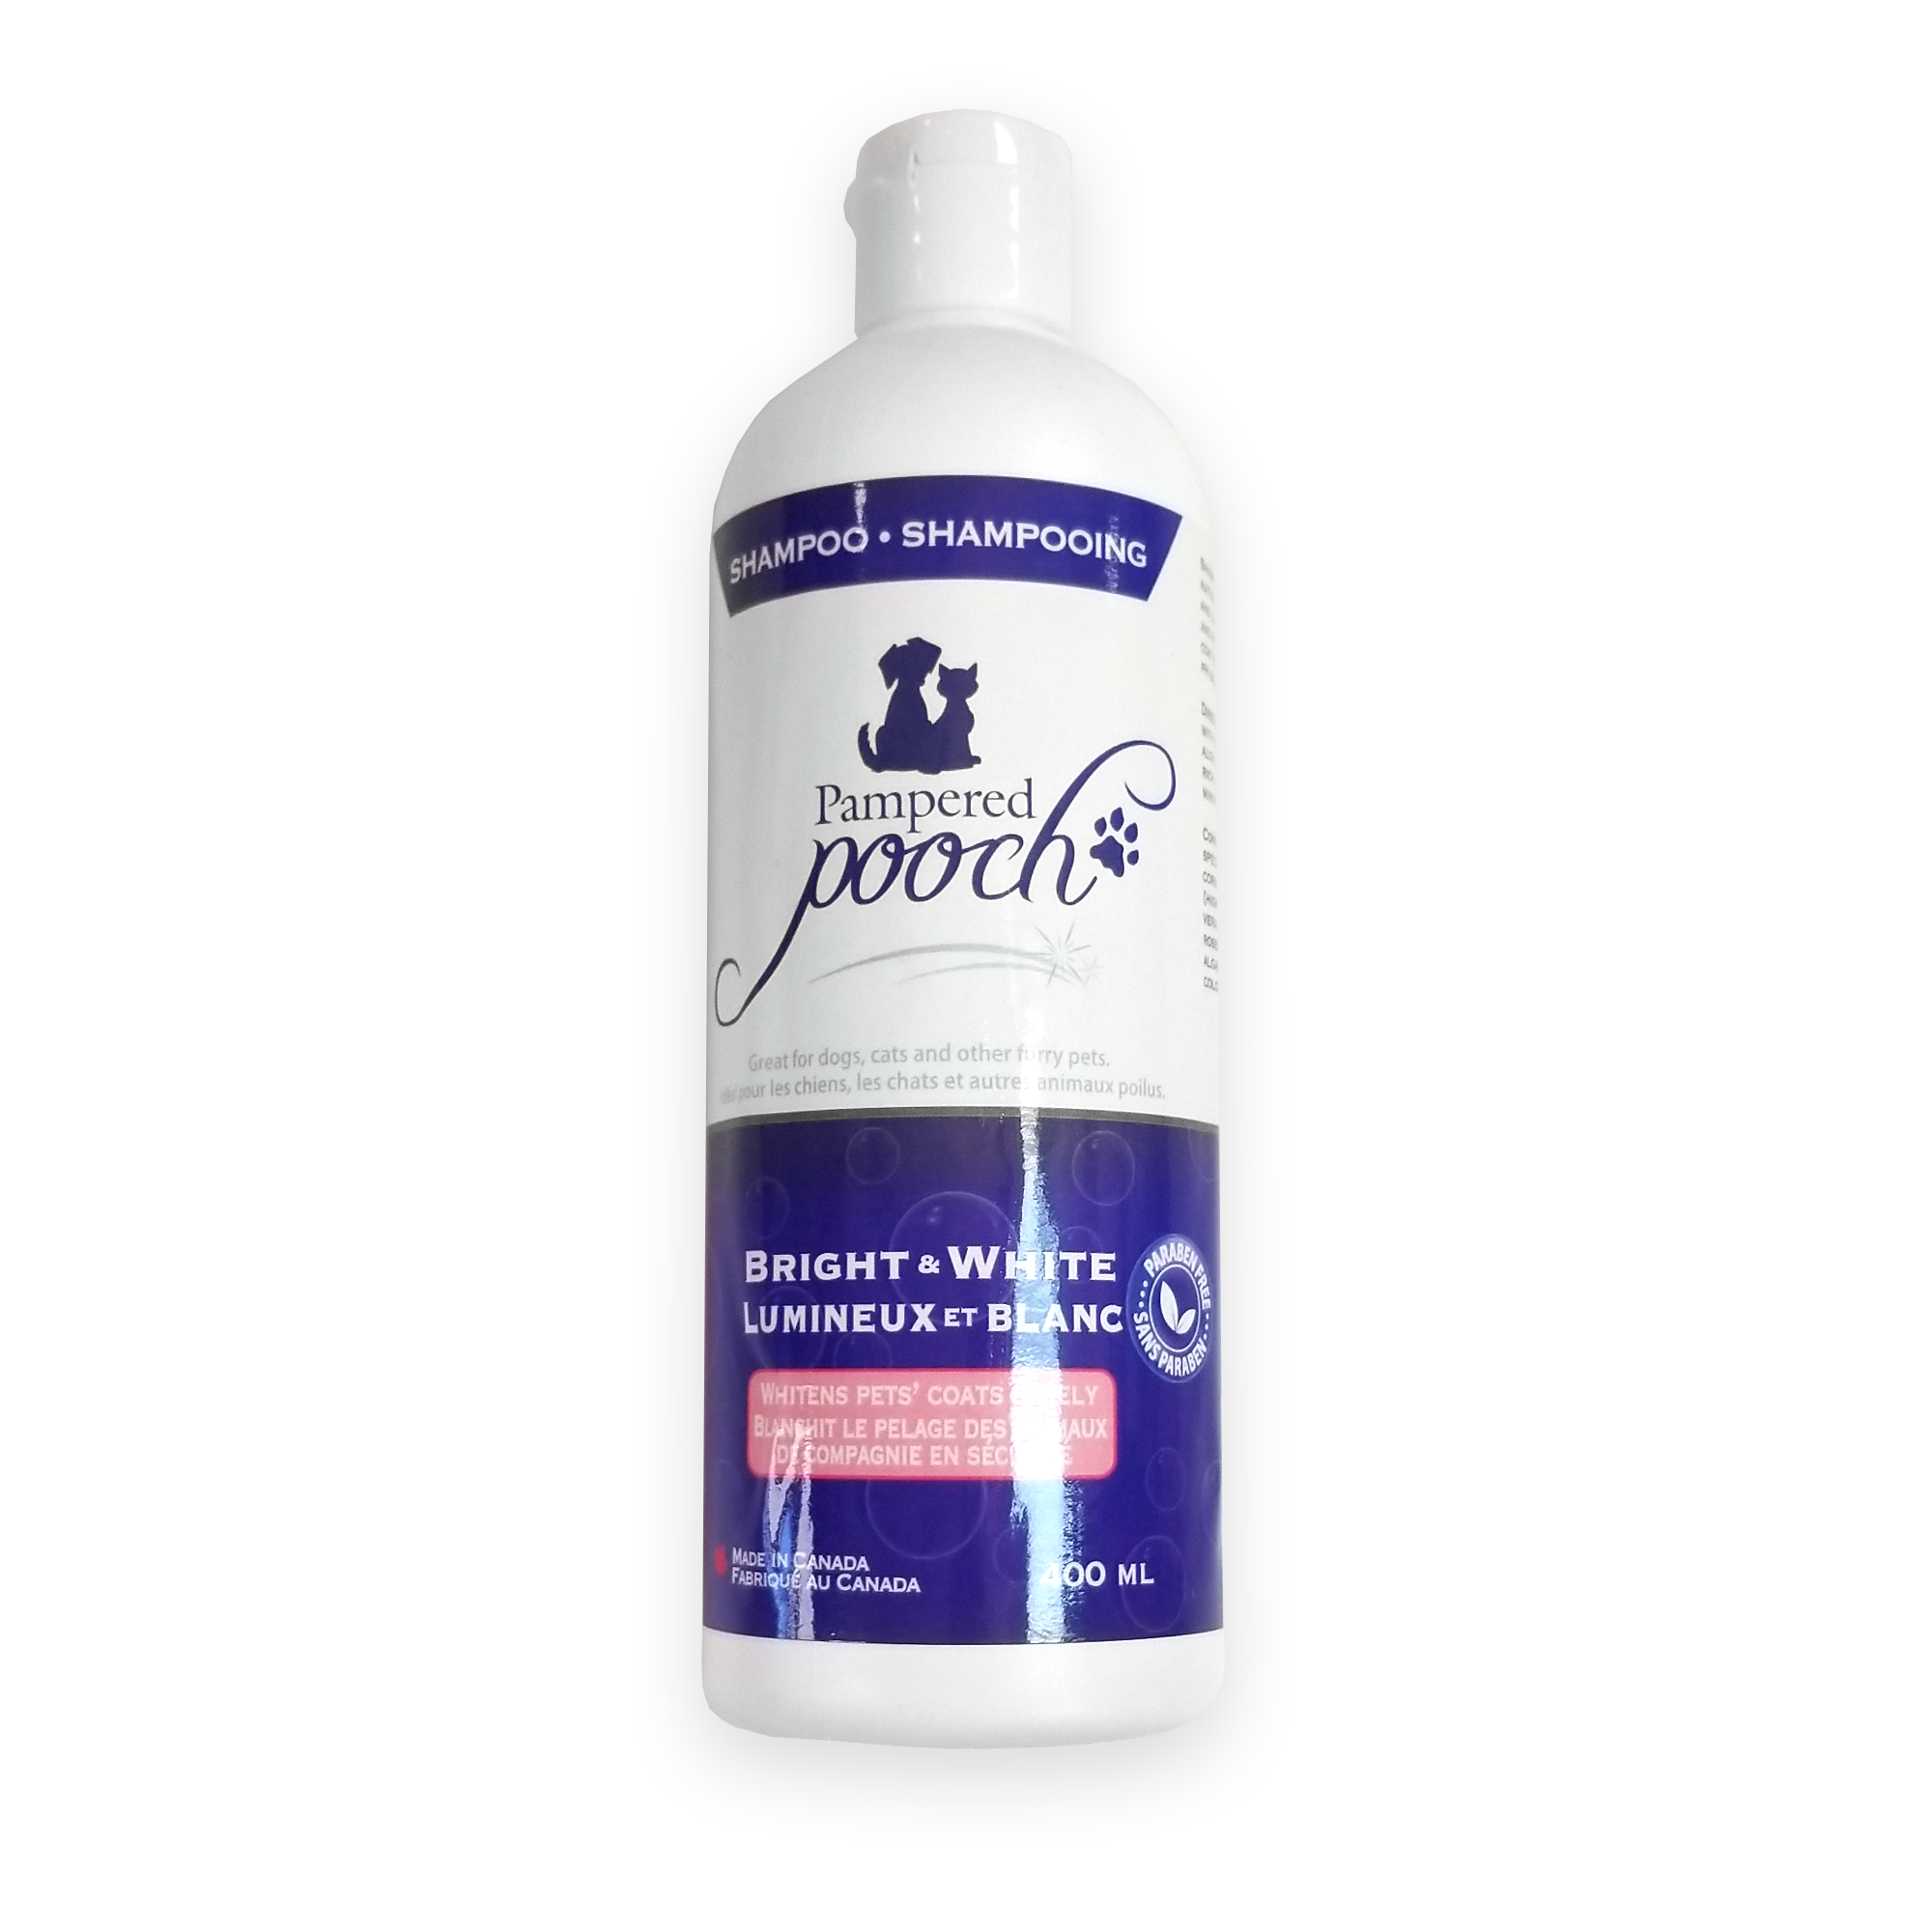 Pampered Pooch Bright & White Dog, Cat & Furry Pets Shampoo (400ml)